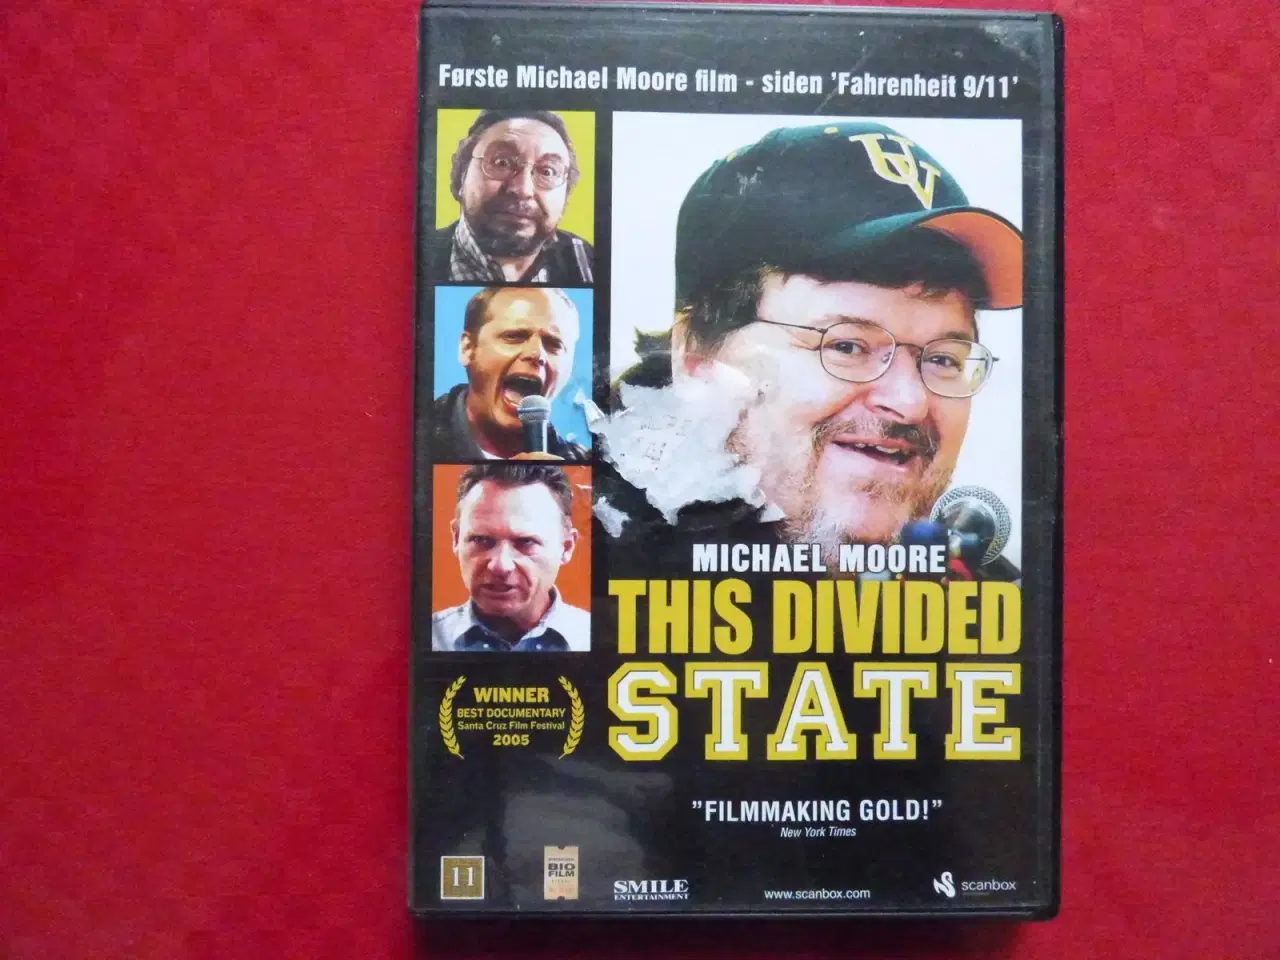 Billede 1 - Michael Moore: This divided state